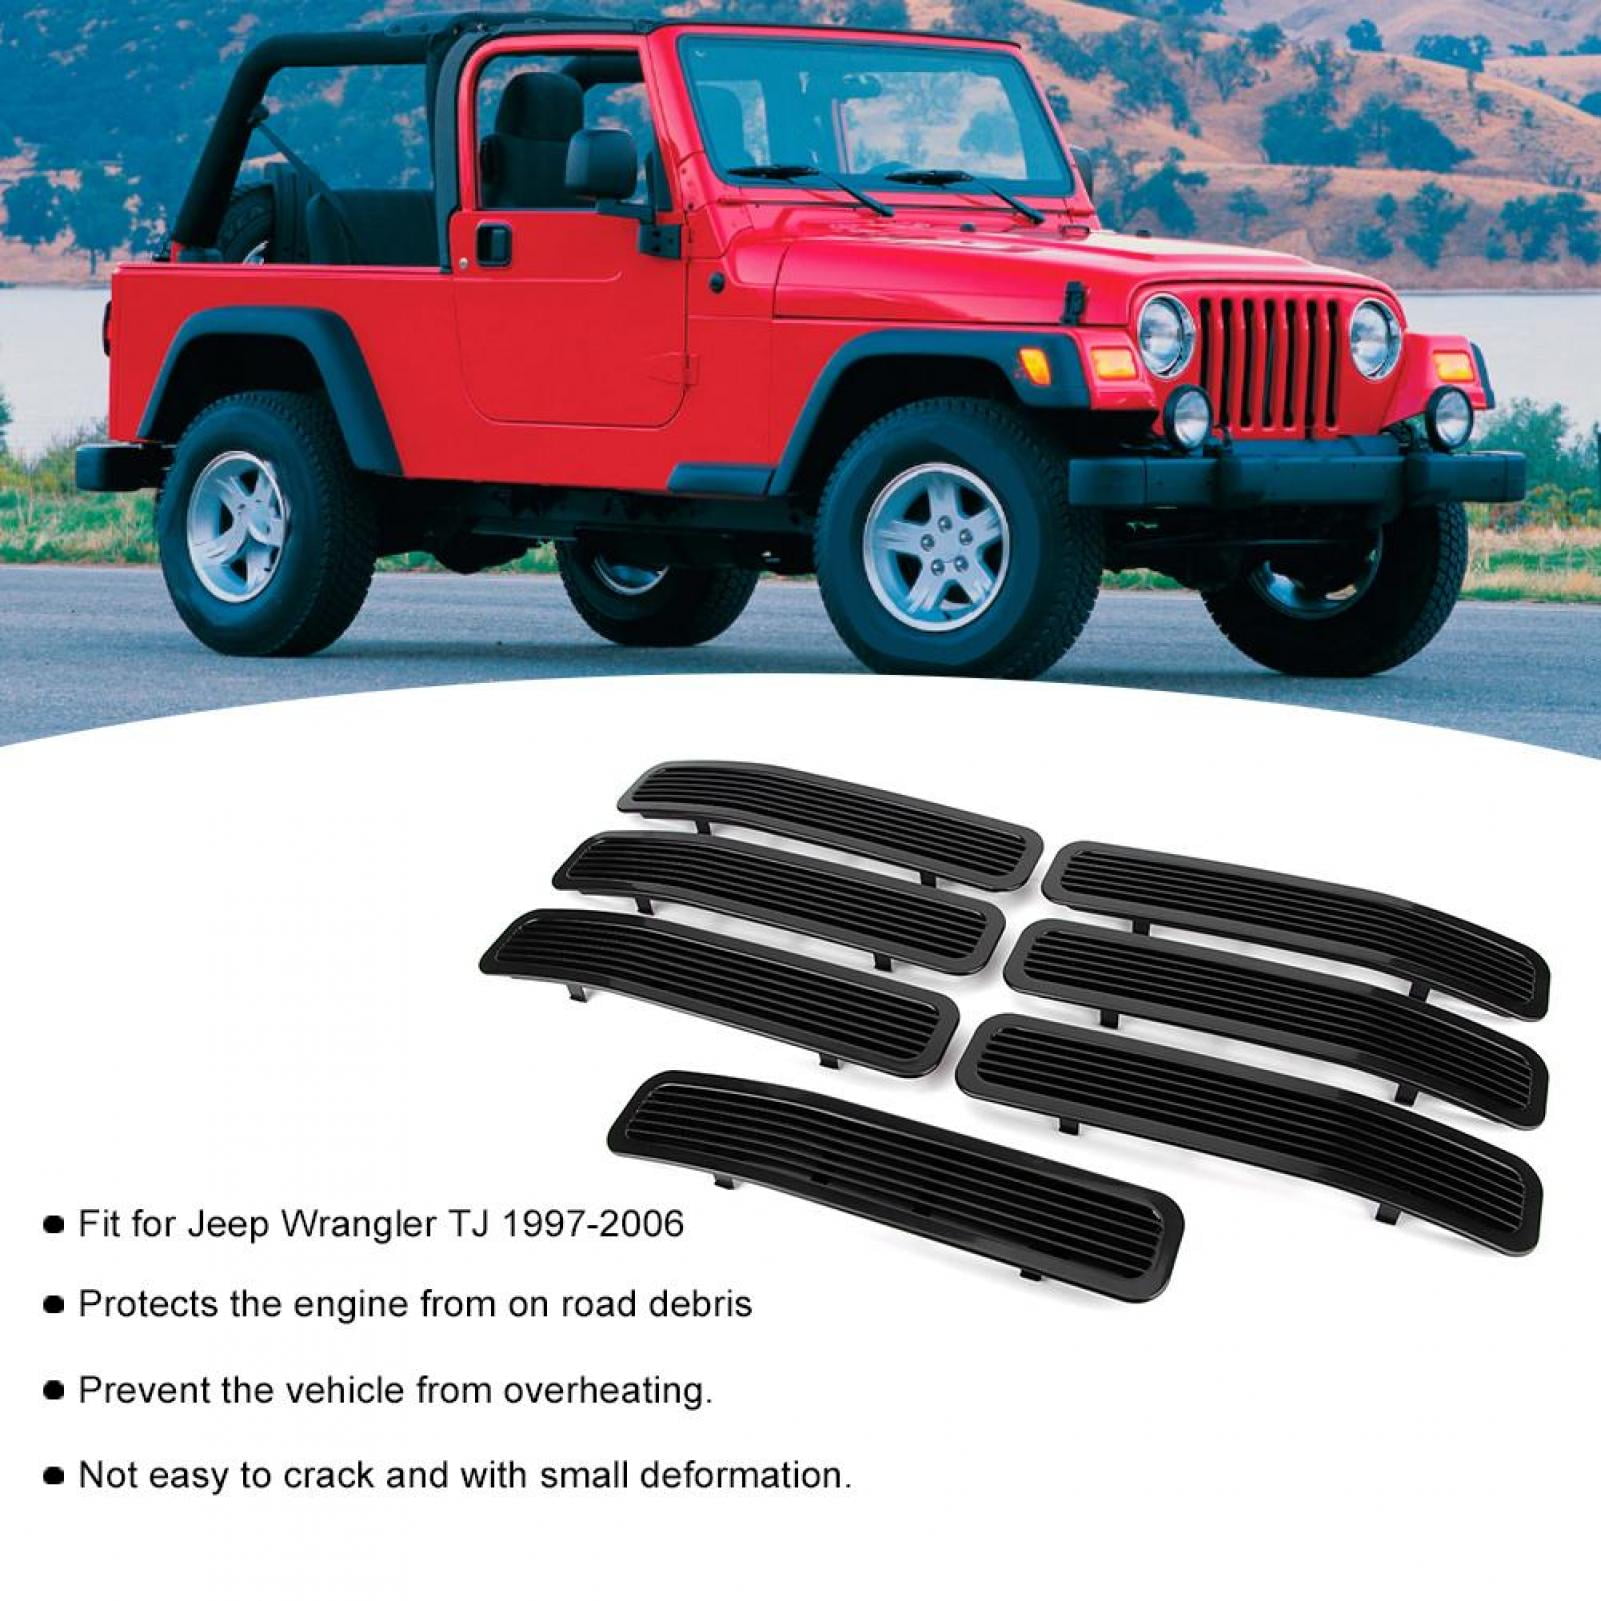 LHCER 7Pcs Front Grill Mesh Grille Insert Cover Trim Fit For Jeep TJ 1997- 2006 Black,Front Grille,Grille Insert Cover 